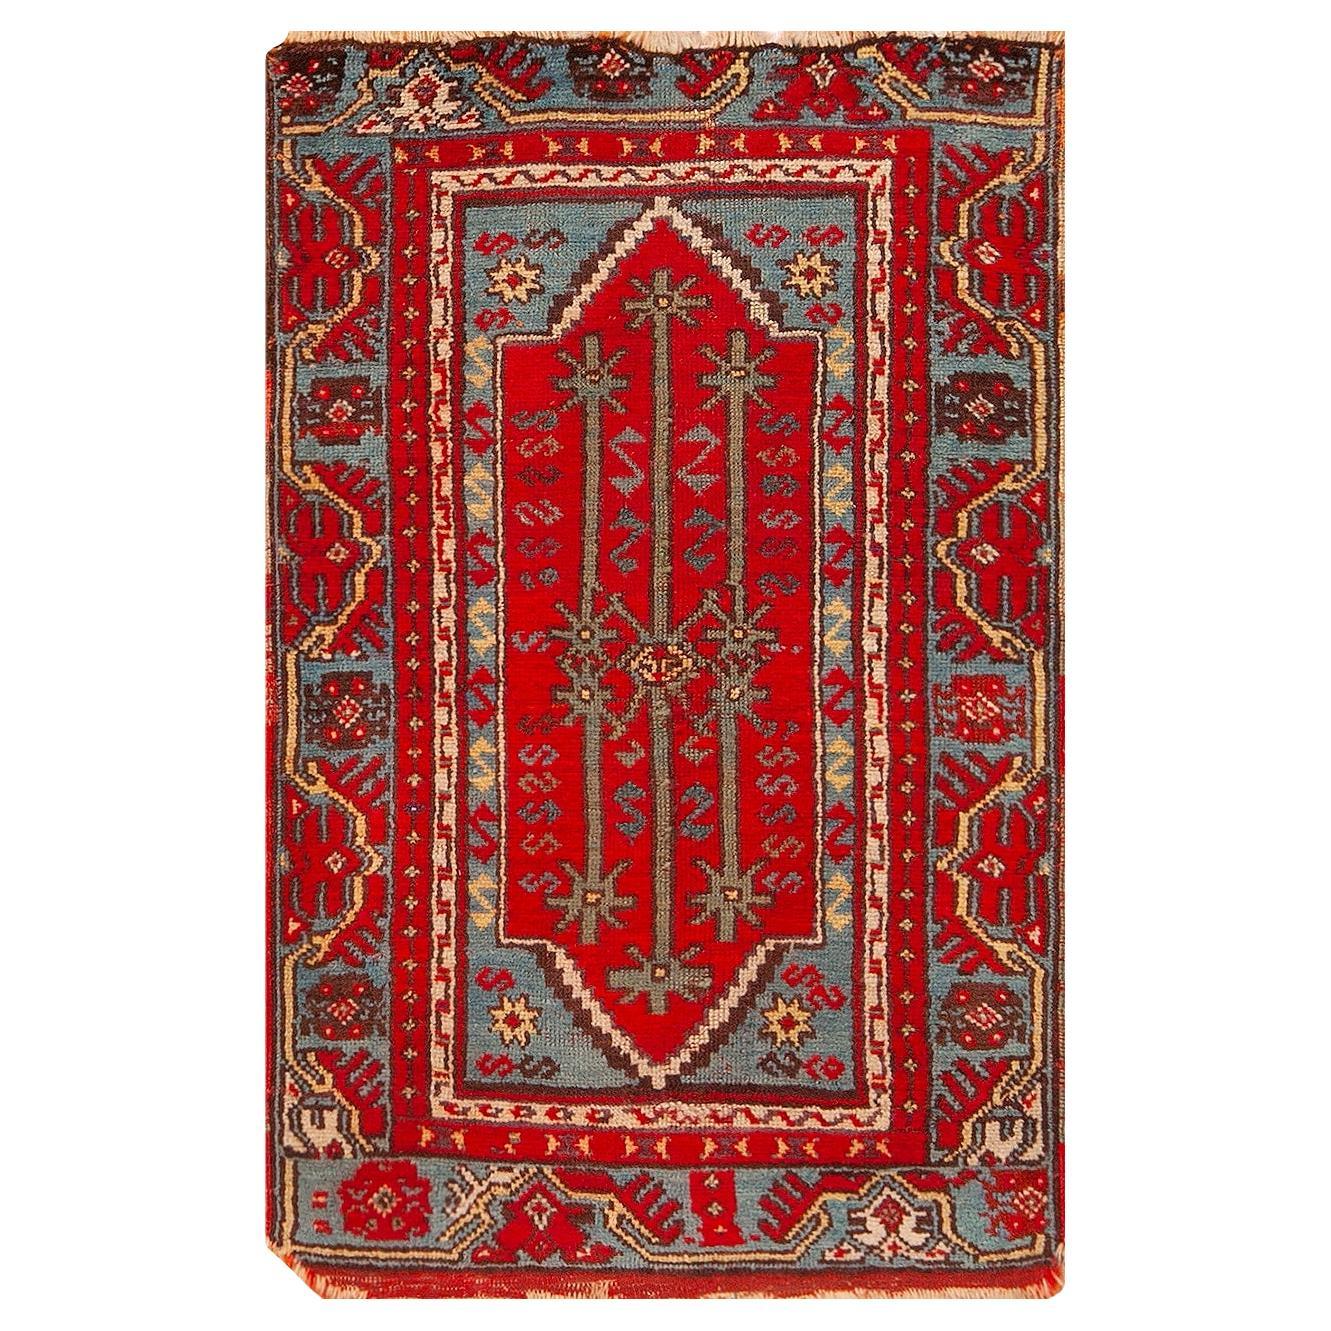 Small Scatter Size Tribal Geometric Antique Turkish Yastic Rug 1'11" x 3'